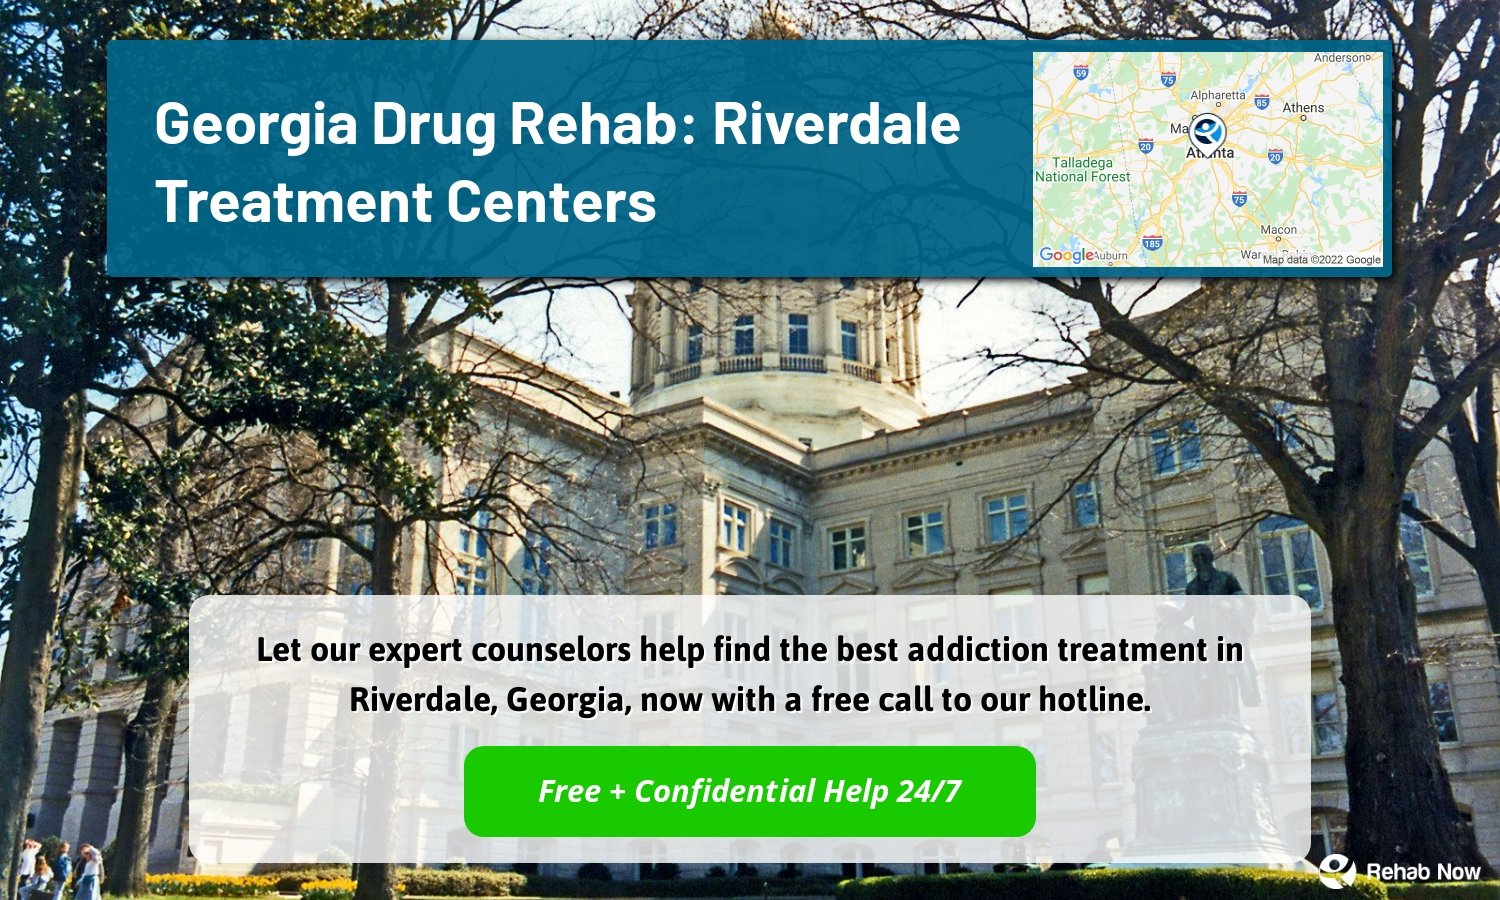 Let our expert counselors help find the best addiction treatment in Riverdale, Georgia, now with a free call to our hotline.